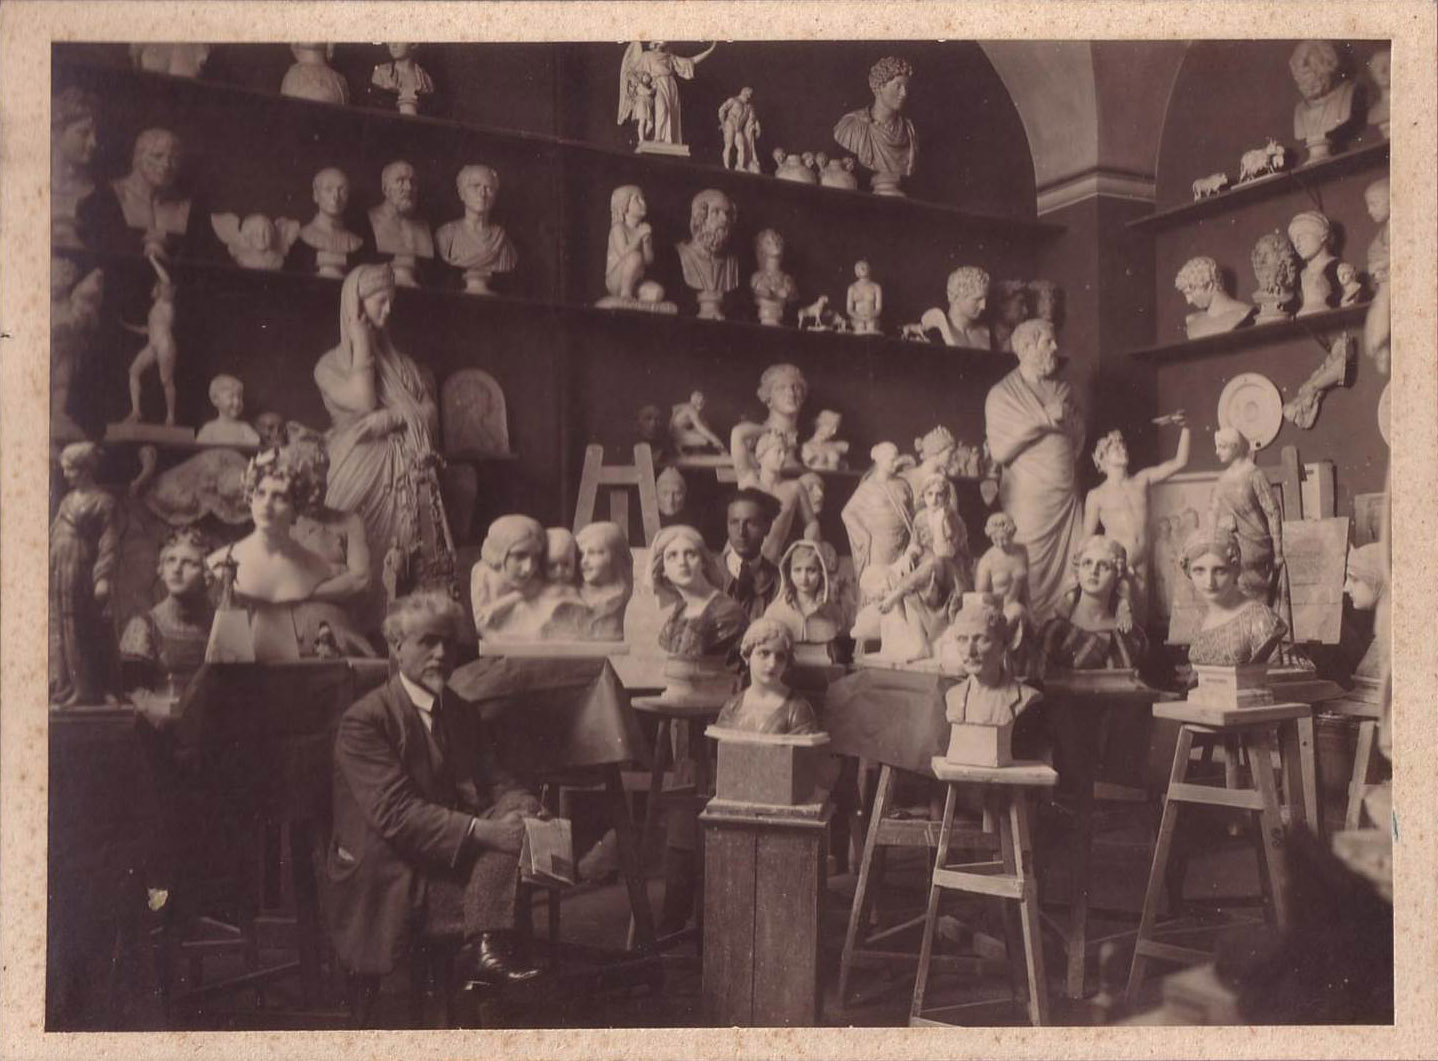 Prof. Giuseppe. Bessi, a long term director of the school, between the students' work. The picture was taken still in the original building of the Istituto d'Arte